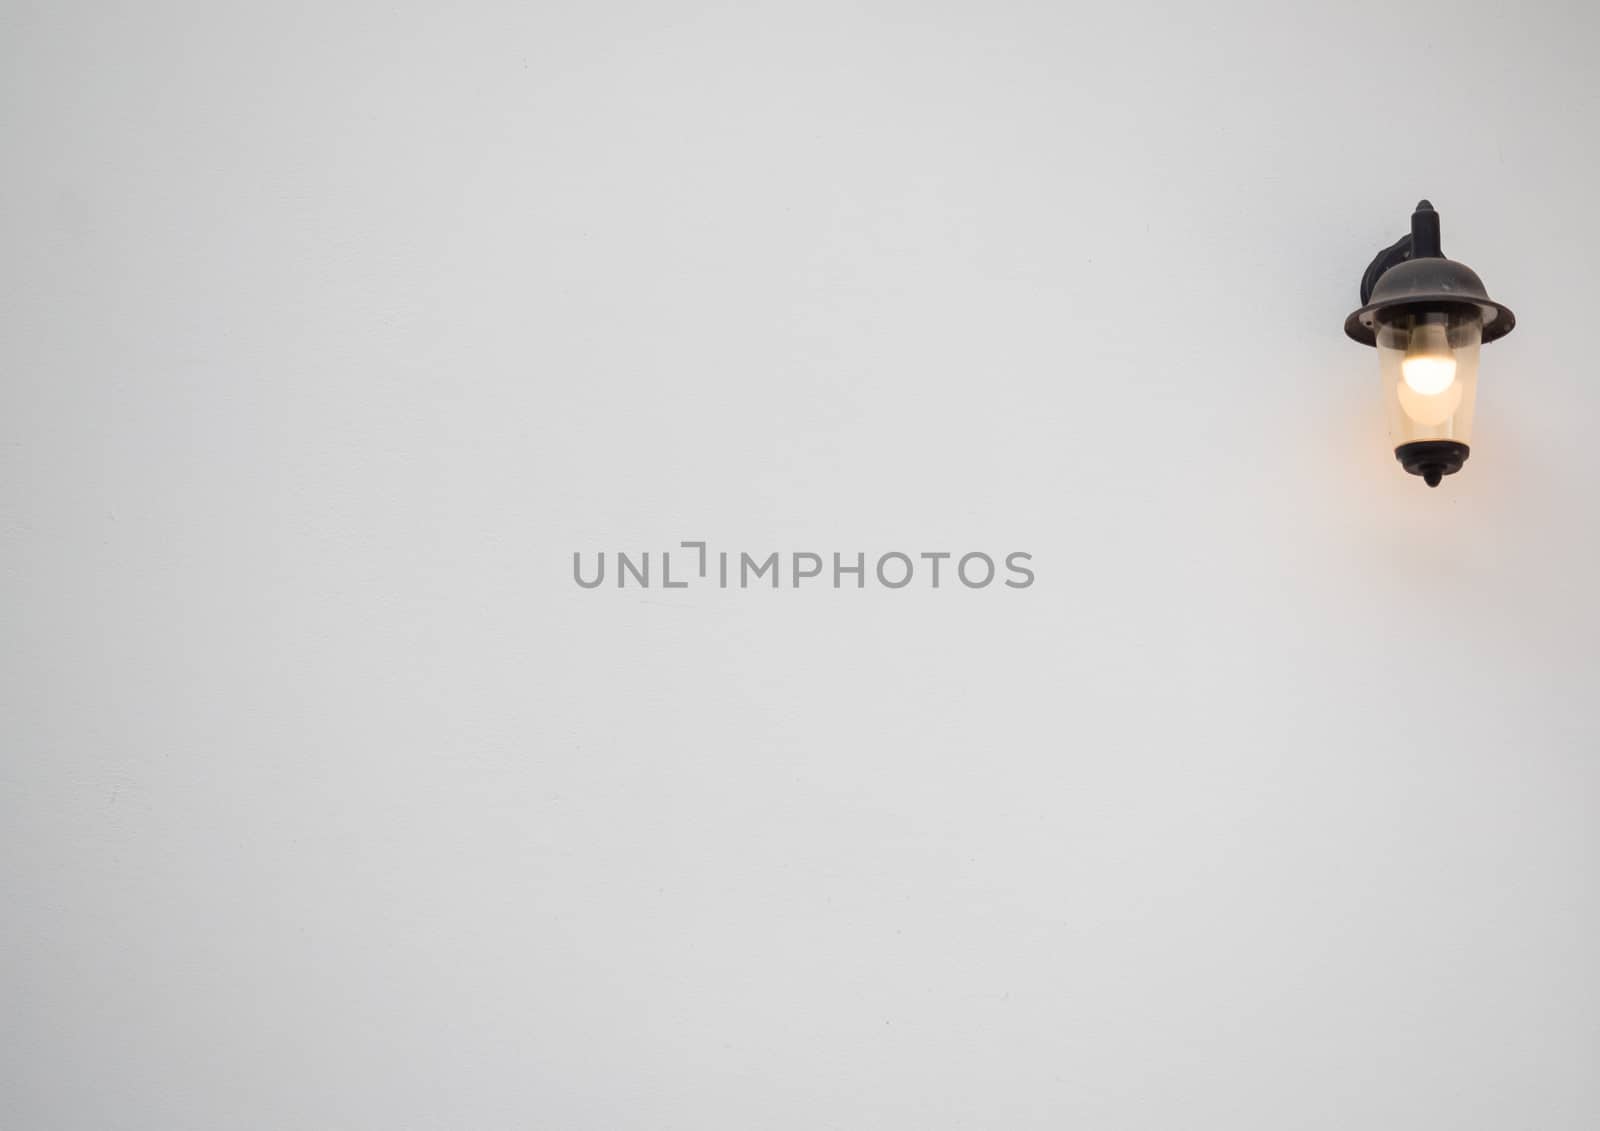 Warm light, led lamp in an antique lamp on a white wall in a minimalist style with copy space.